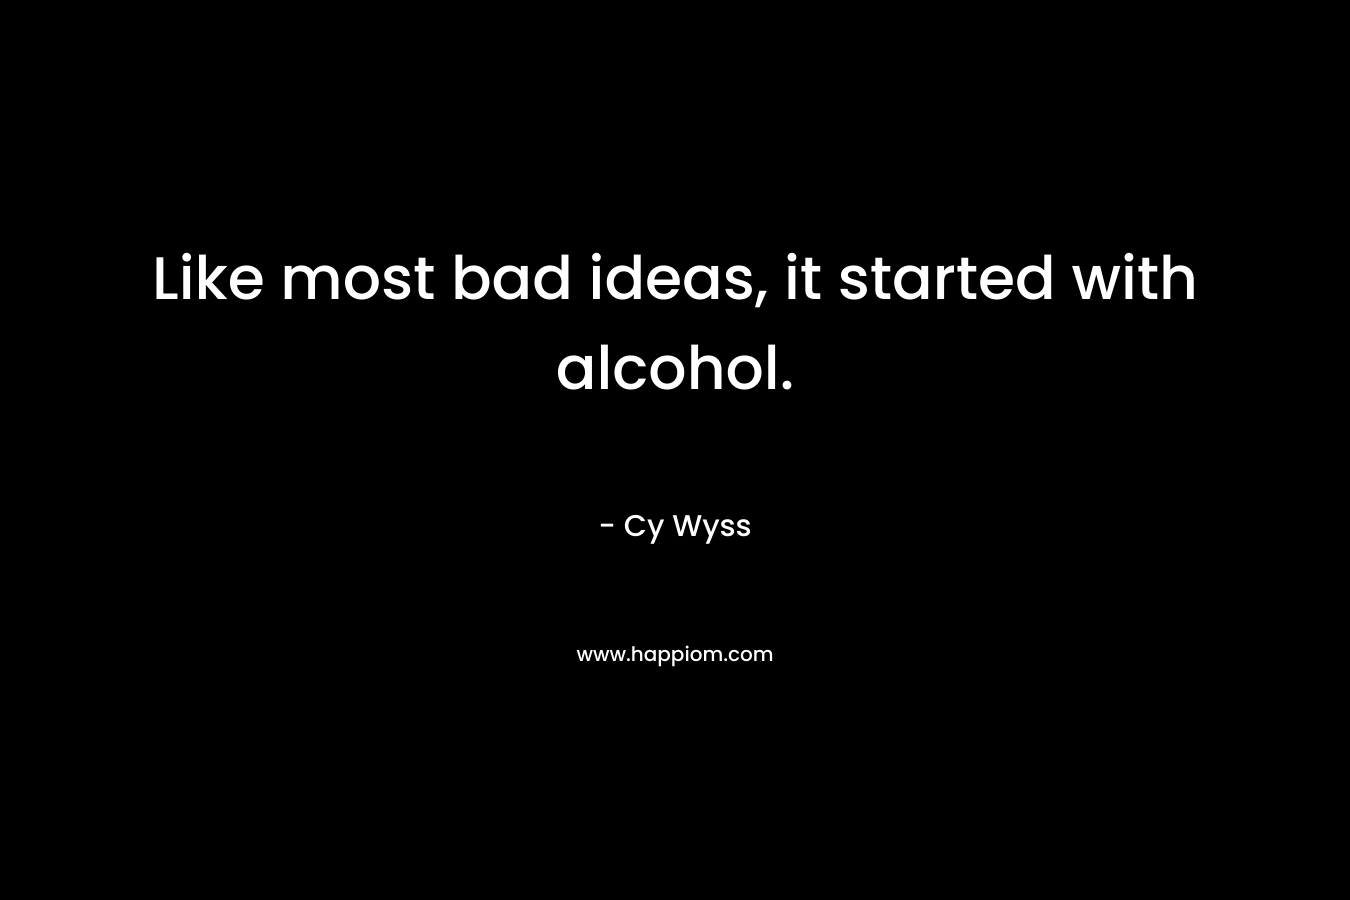 Like most bad ideas, it started with alcohol. – Cy Wyss